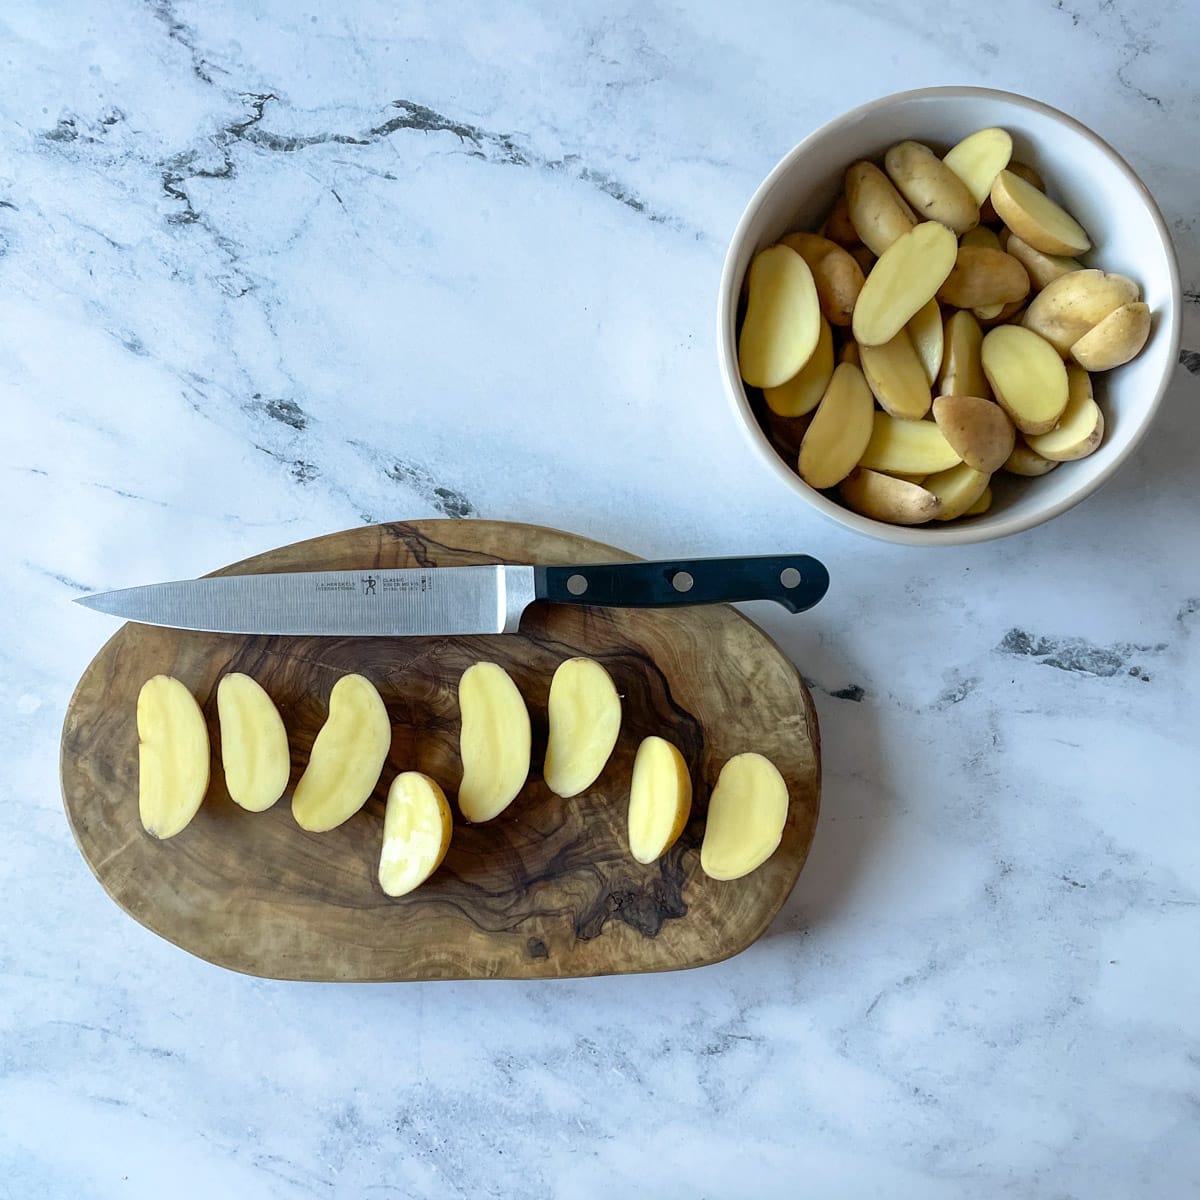 Fingerling potatoes cut lengthwise on a wood cutting board with a bowl of cut potatoes in the background on a white marble counter.